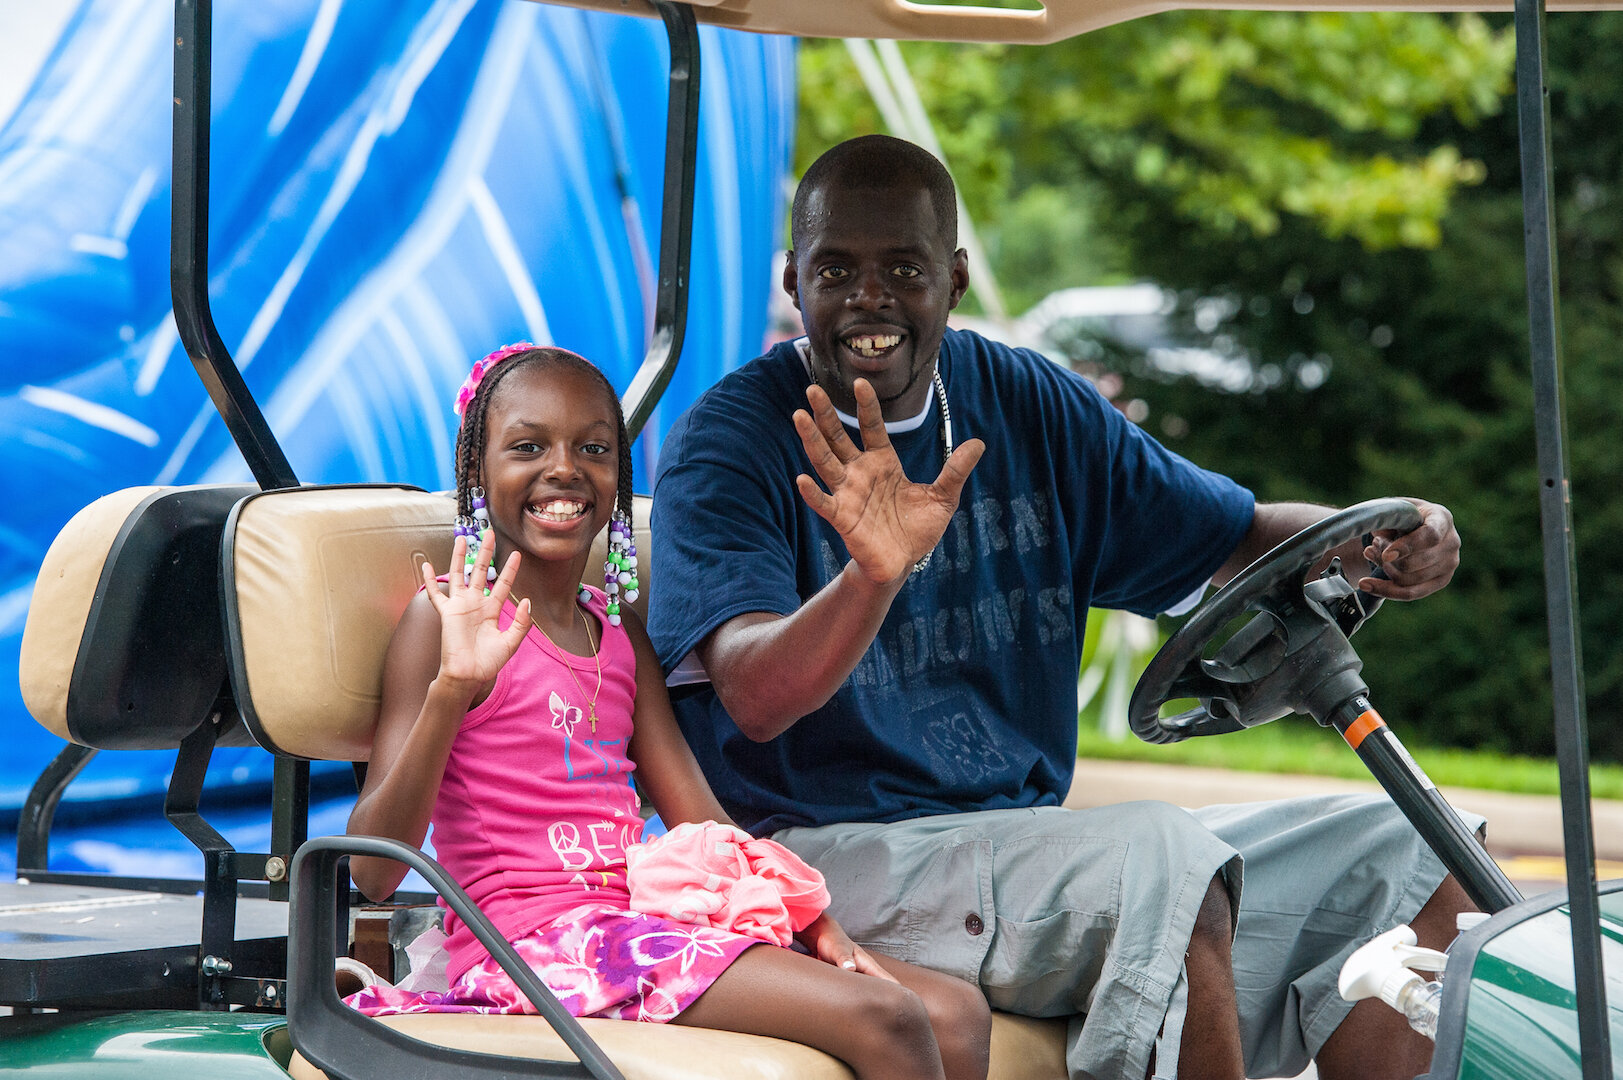  A father and daughter enjoying an Ashburn Meadows community event. 